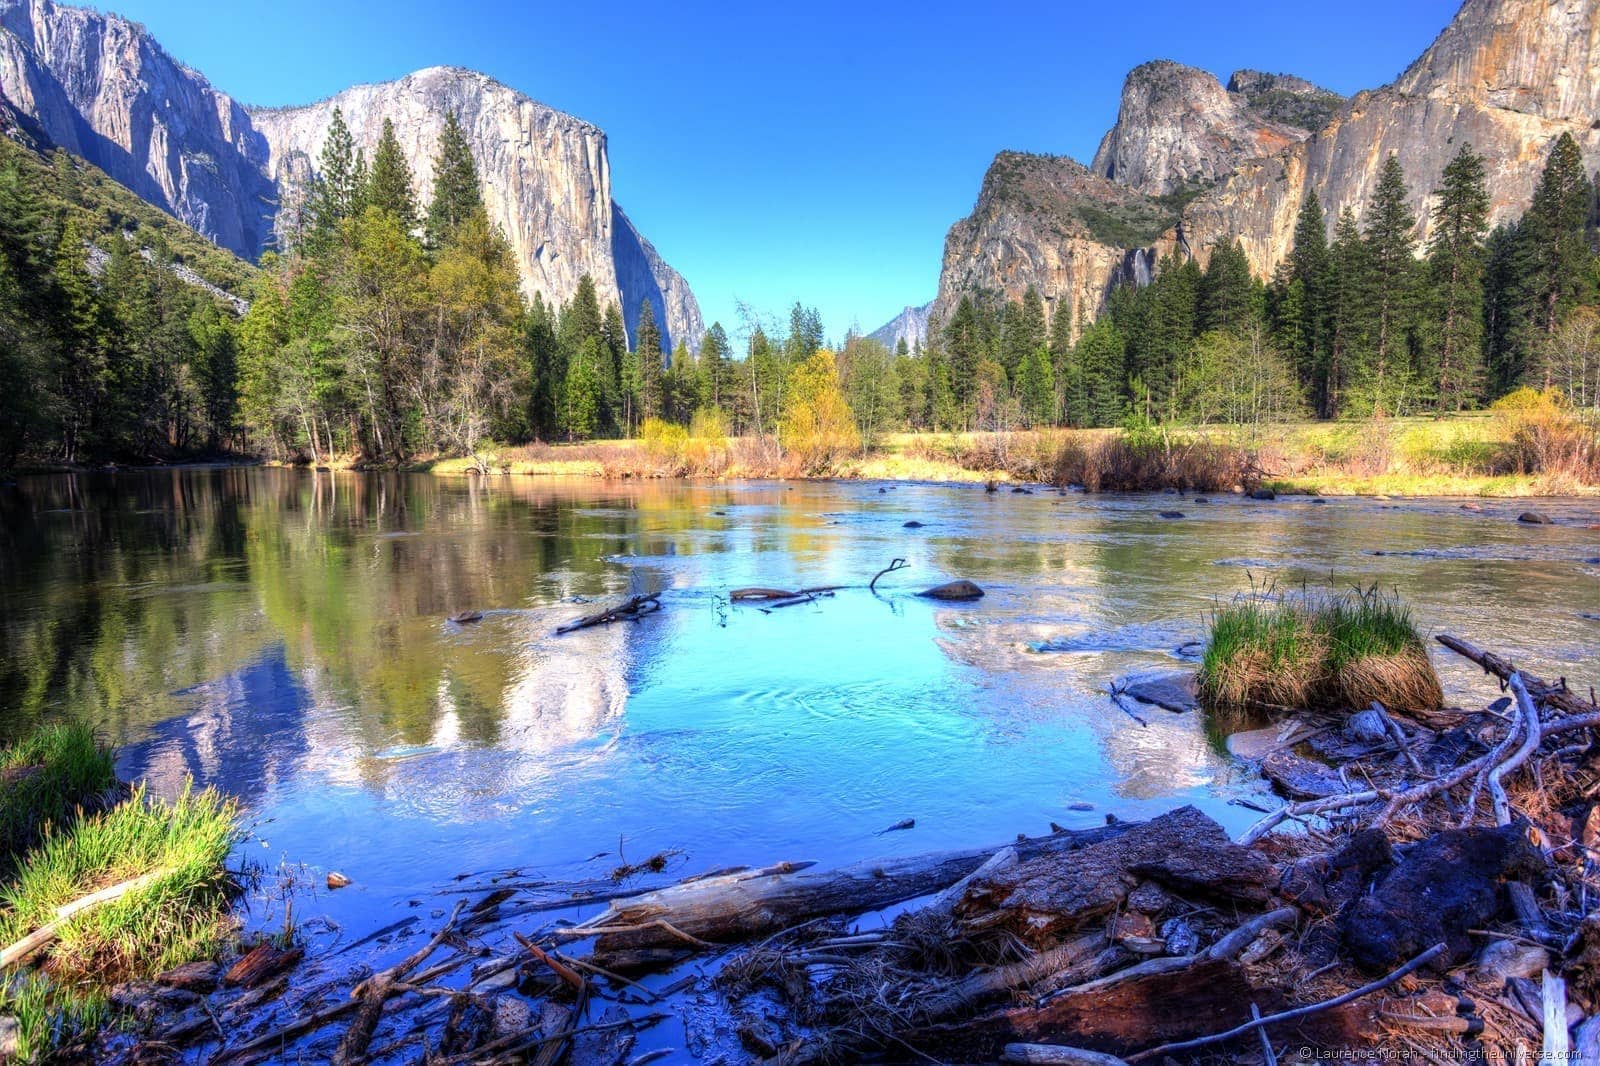 The Best Photography Spots In Yosemite the Universe